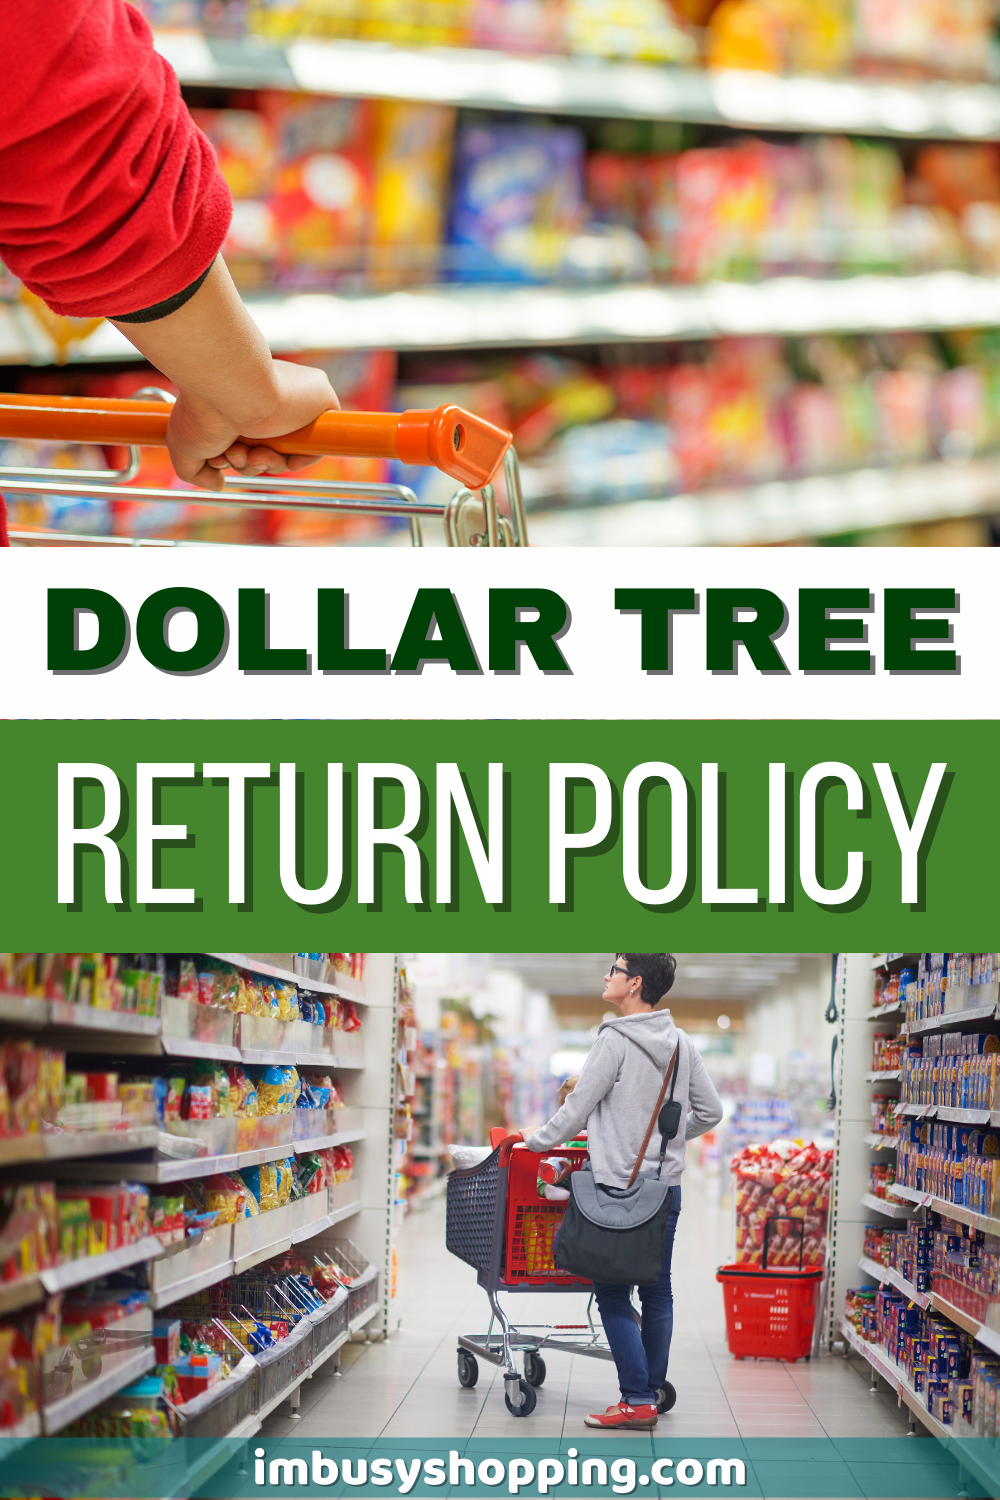 pin image with a guy pushing a push cart in an alley of groceries with title label of "Dollar Tree Return Policy"